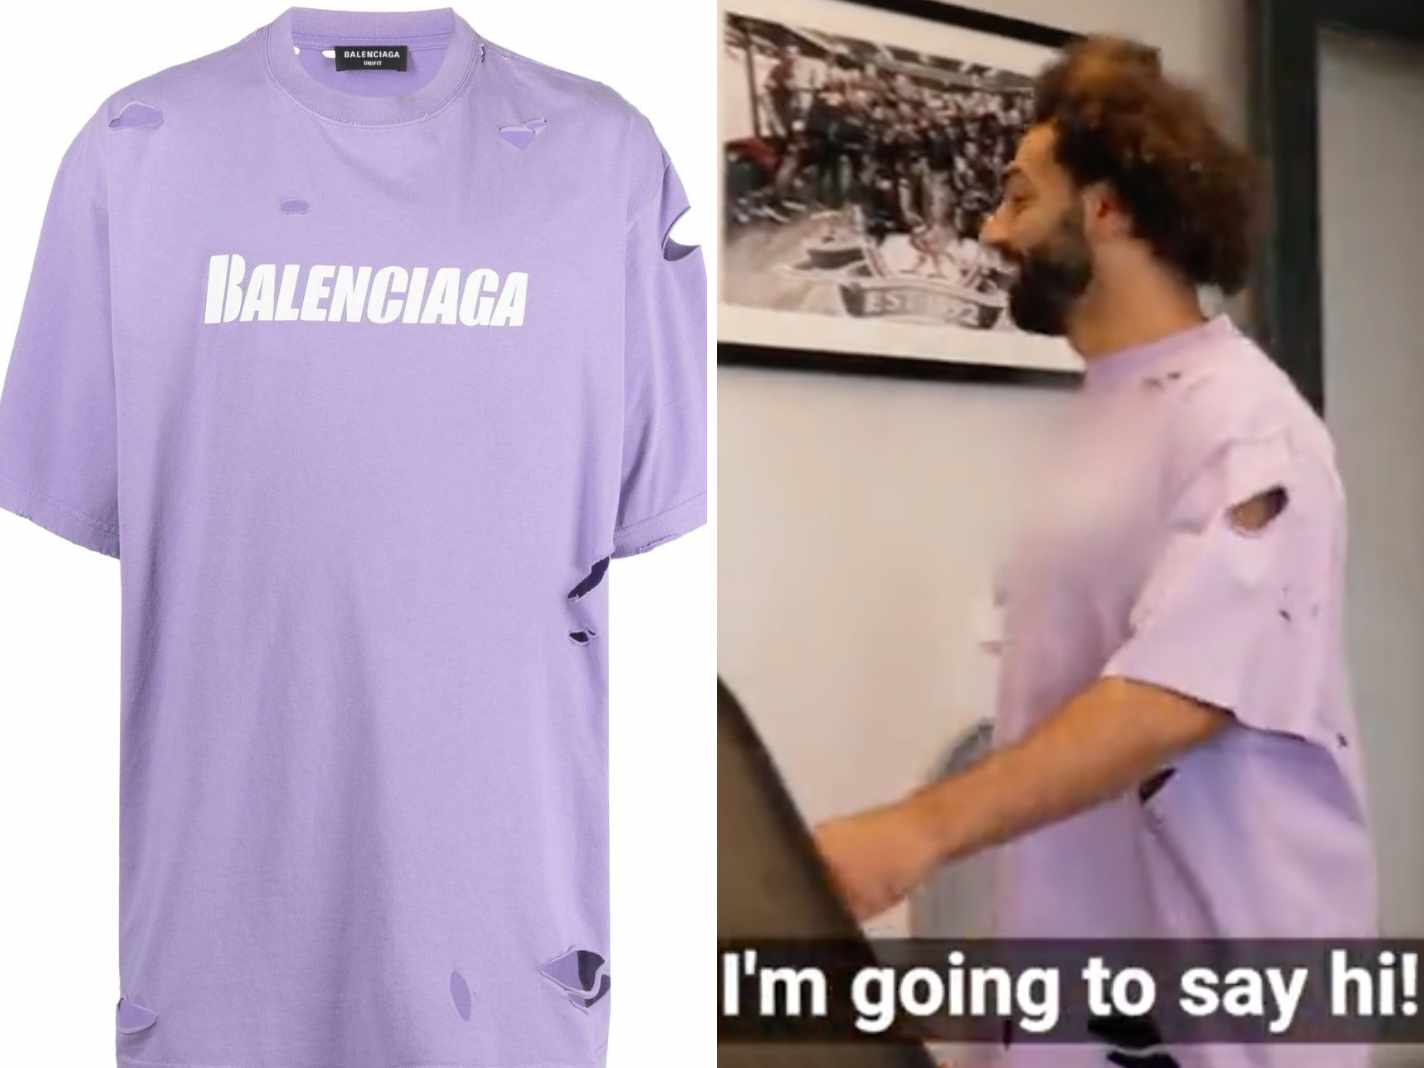 Mohamed Salah Meets Wataru Endo in a Ripped Balenciaga Top, Here’s What It Really Costs